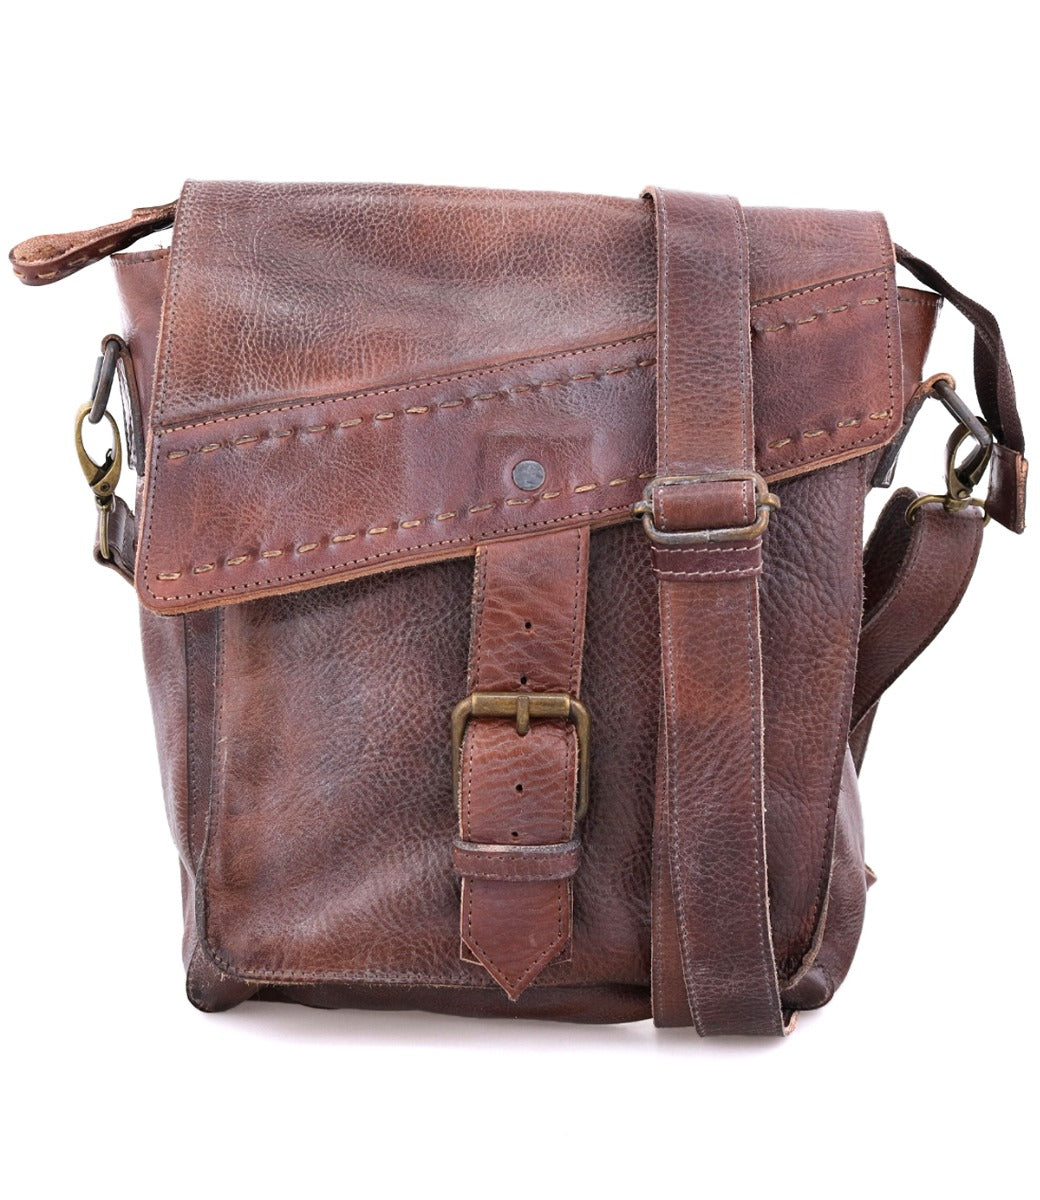 A Bed Stu Ainhoa brown leather messenger bag with an adjustable strap and zip-top closure.